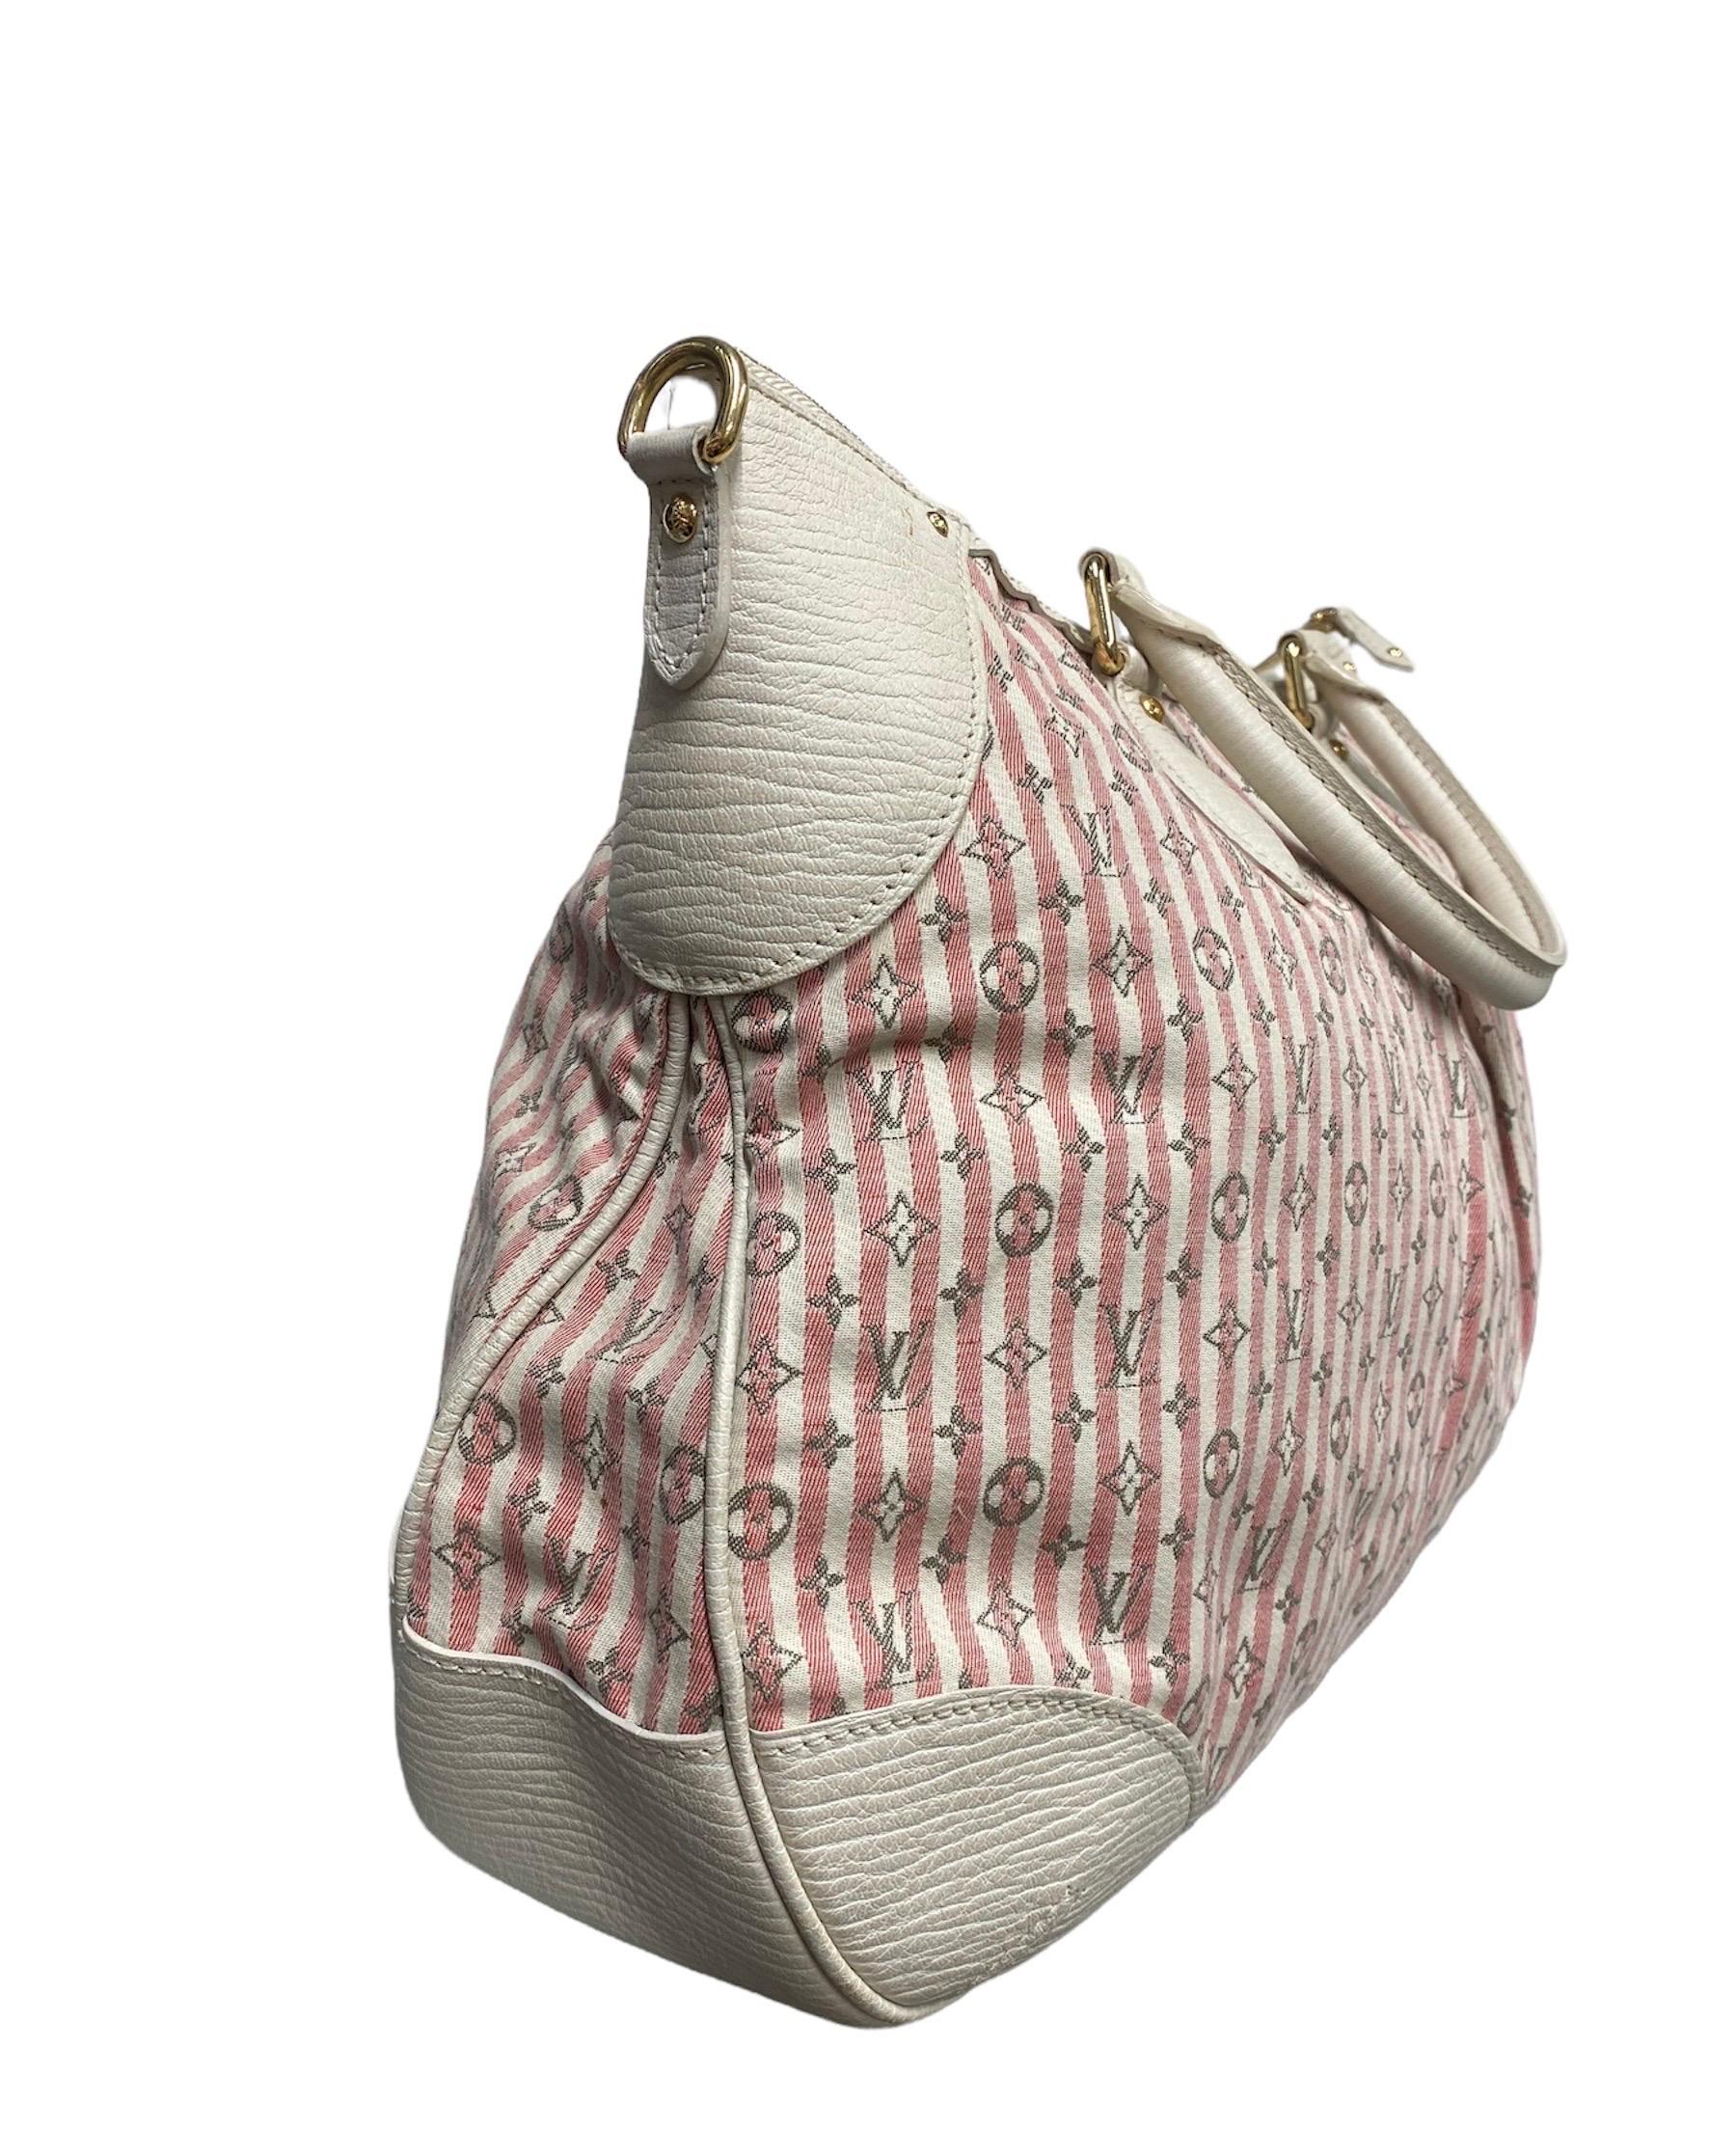 Louis Vuitton handbag, Croisette Marina model made of white Mini Lin fabric with pink stripes and leather inserts, with gold hardware.
Equipped with a top zip closure and internal welt pockets.
Internally upholstered in beige fabric, very